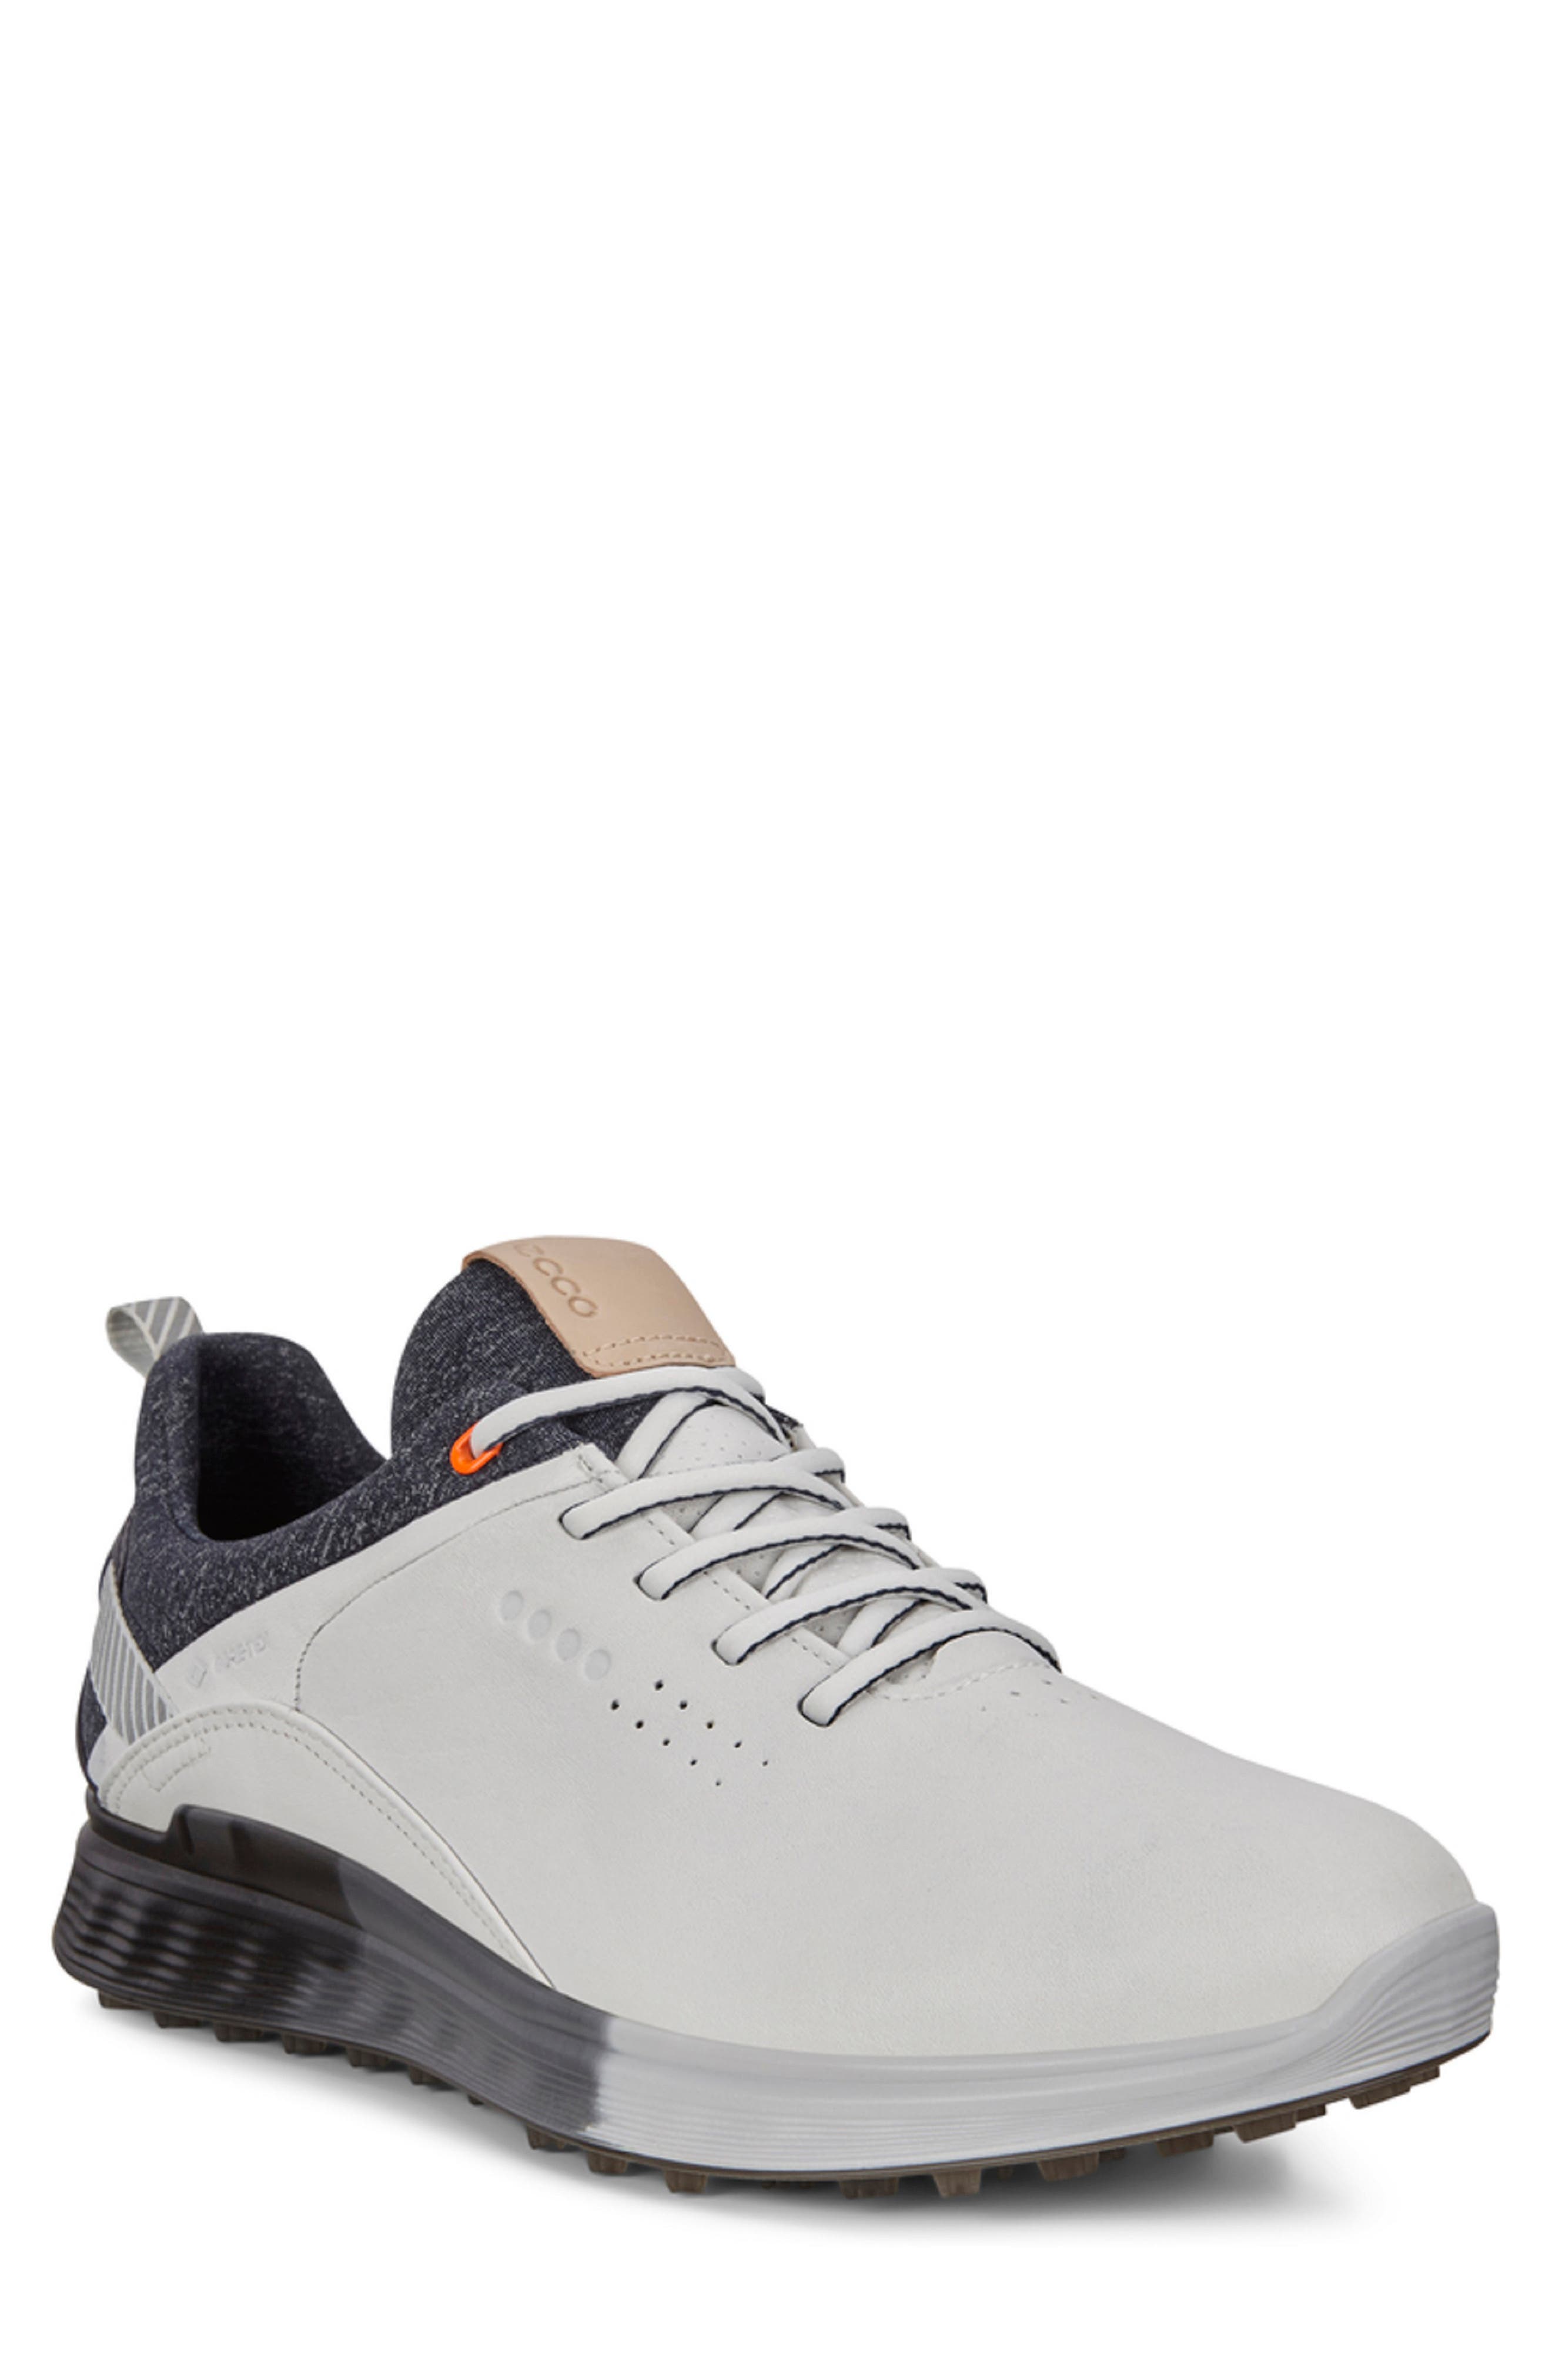 UPC 825840412659 product image for ECCO S-Three Waterproof Golf Shoe in White at Nordstrom, Size 13-13.5Us | upcitemdb.com